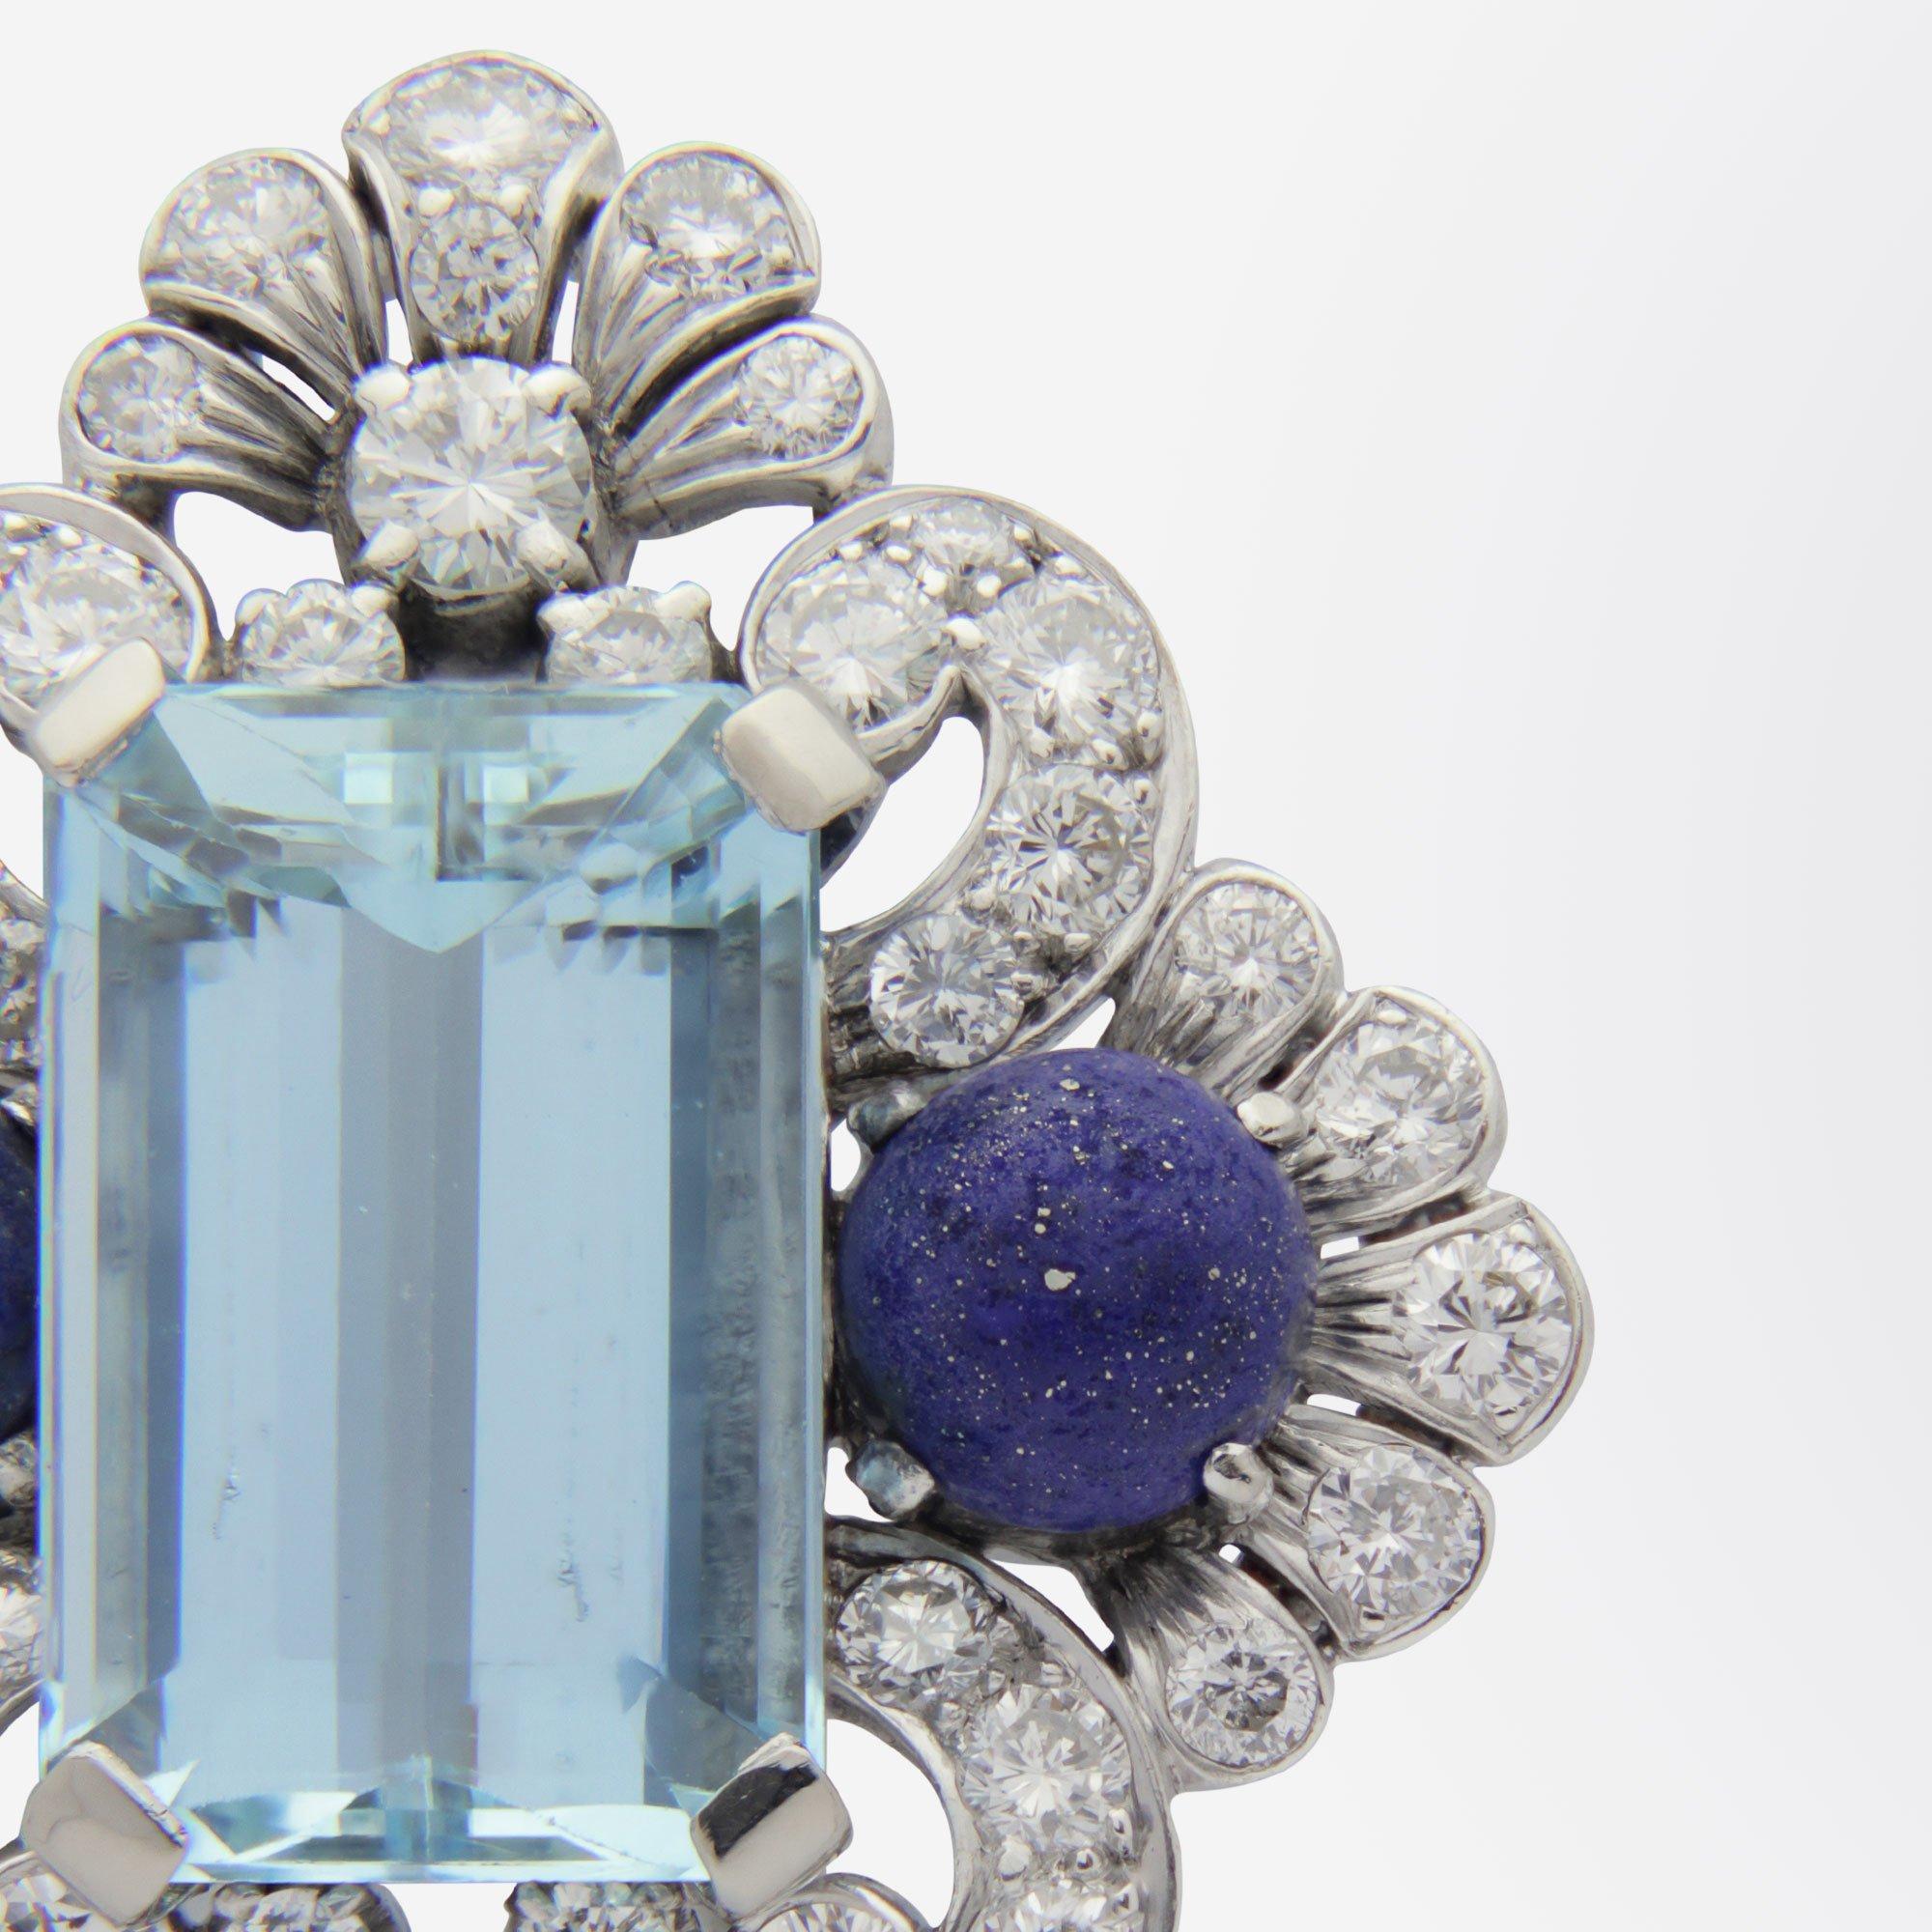 An exceptional diamond, aquamarine and lapis brooch pin set in a handmade silver setting. The piece centres on an emerald cut aquamarine of 'bright light to mid blue' colour weighing 8.15 carat. The aquamarine is flanked by a pair of cabochon pieces